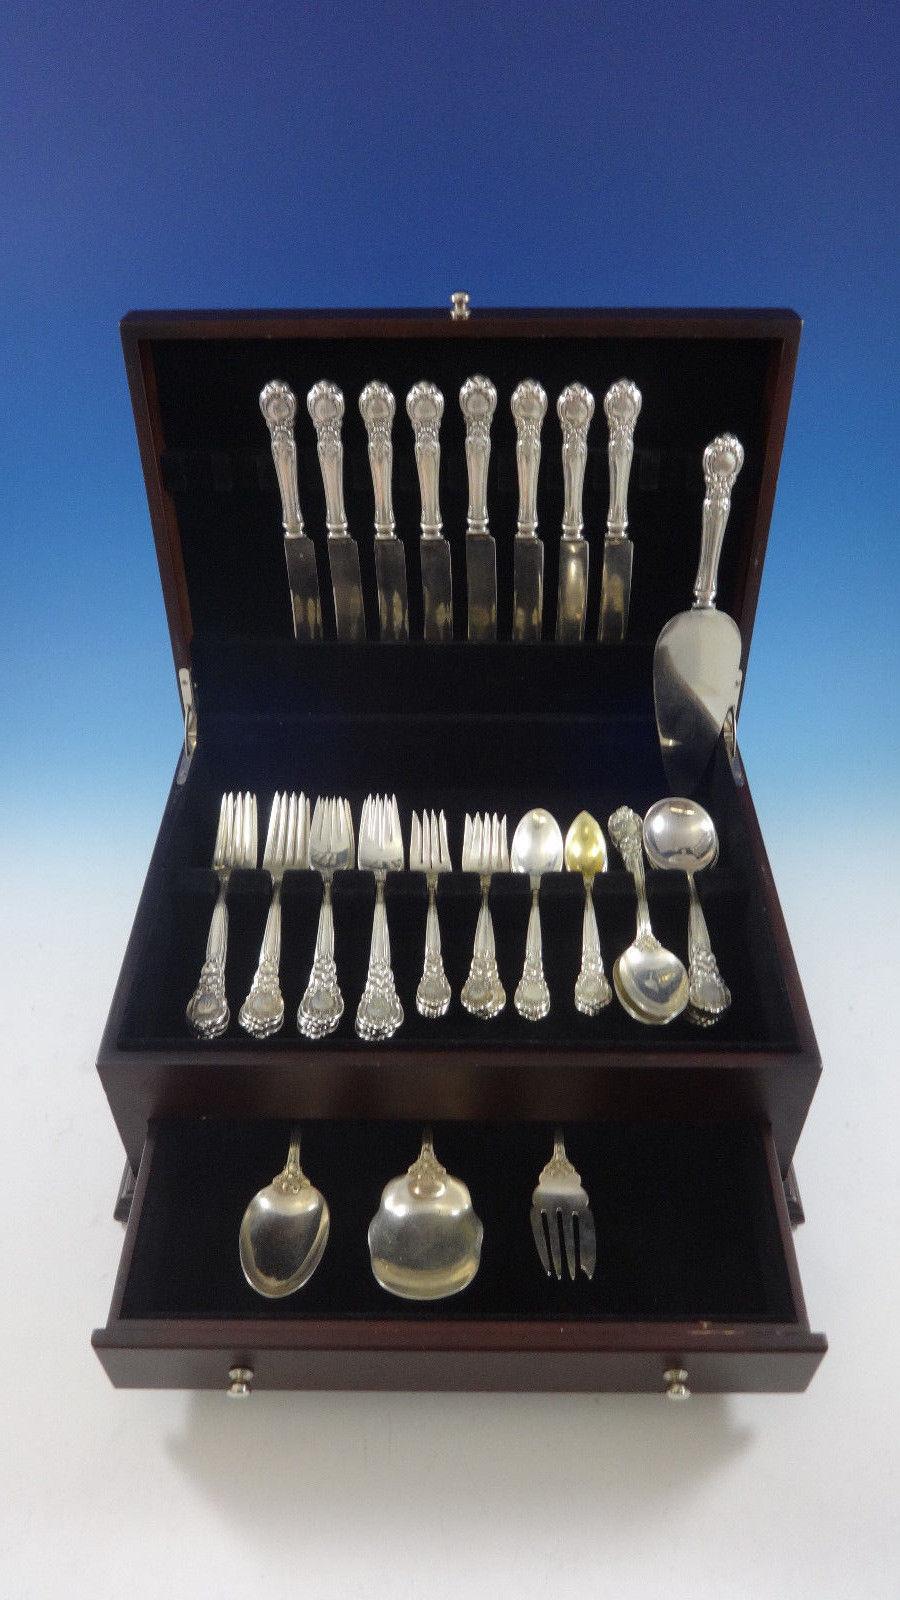 Royal Oak by Gorham sterling silver flatware set of 68 pieces. This set includes:

8 knives, 8 1/2